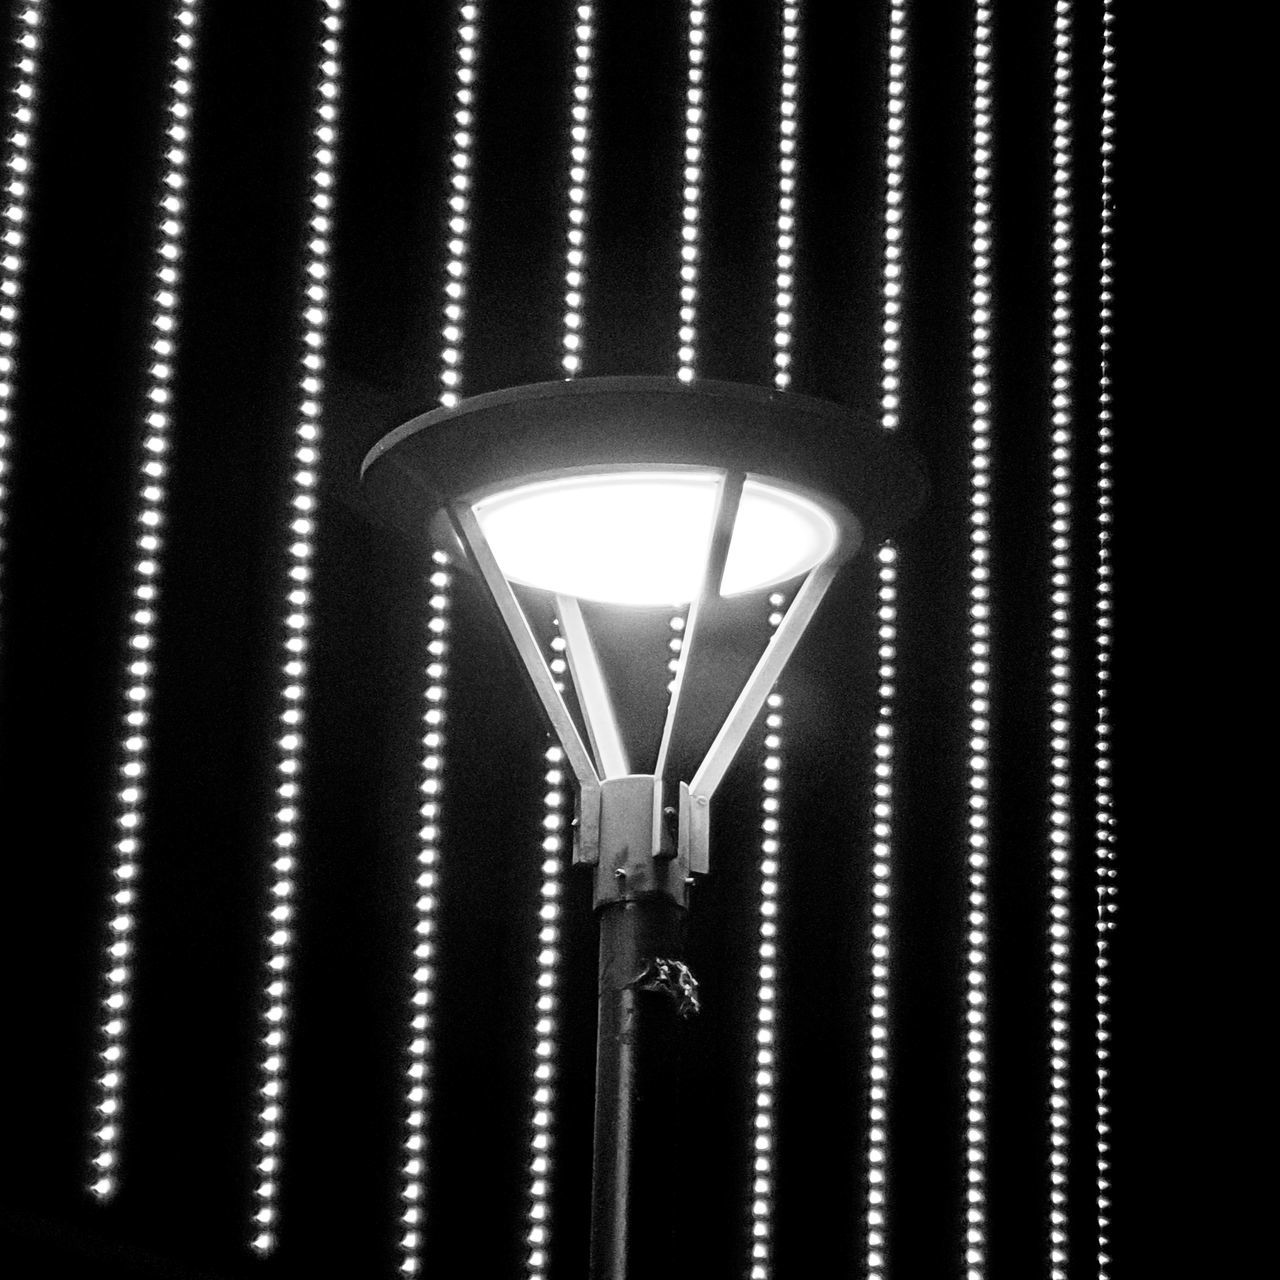 lighting equipment, illuminated, street light, no people, electricity, low angle view, electric light, light fixture, night, light, indoors, light bulb, glowing, lighting, electric lamp, metal, black and white, pattern, light - natural phenomenon, darkness, hanging, technology